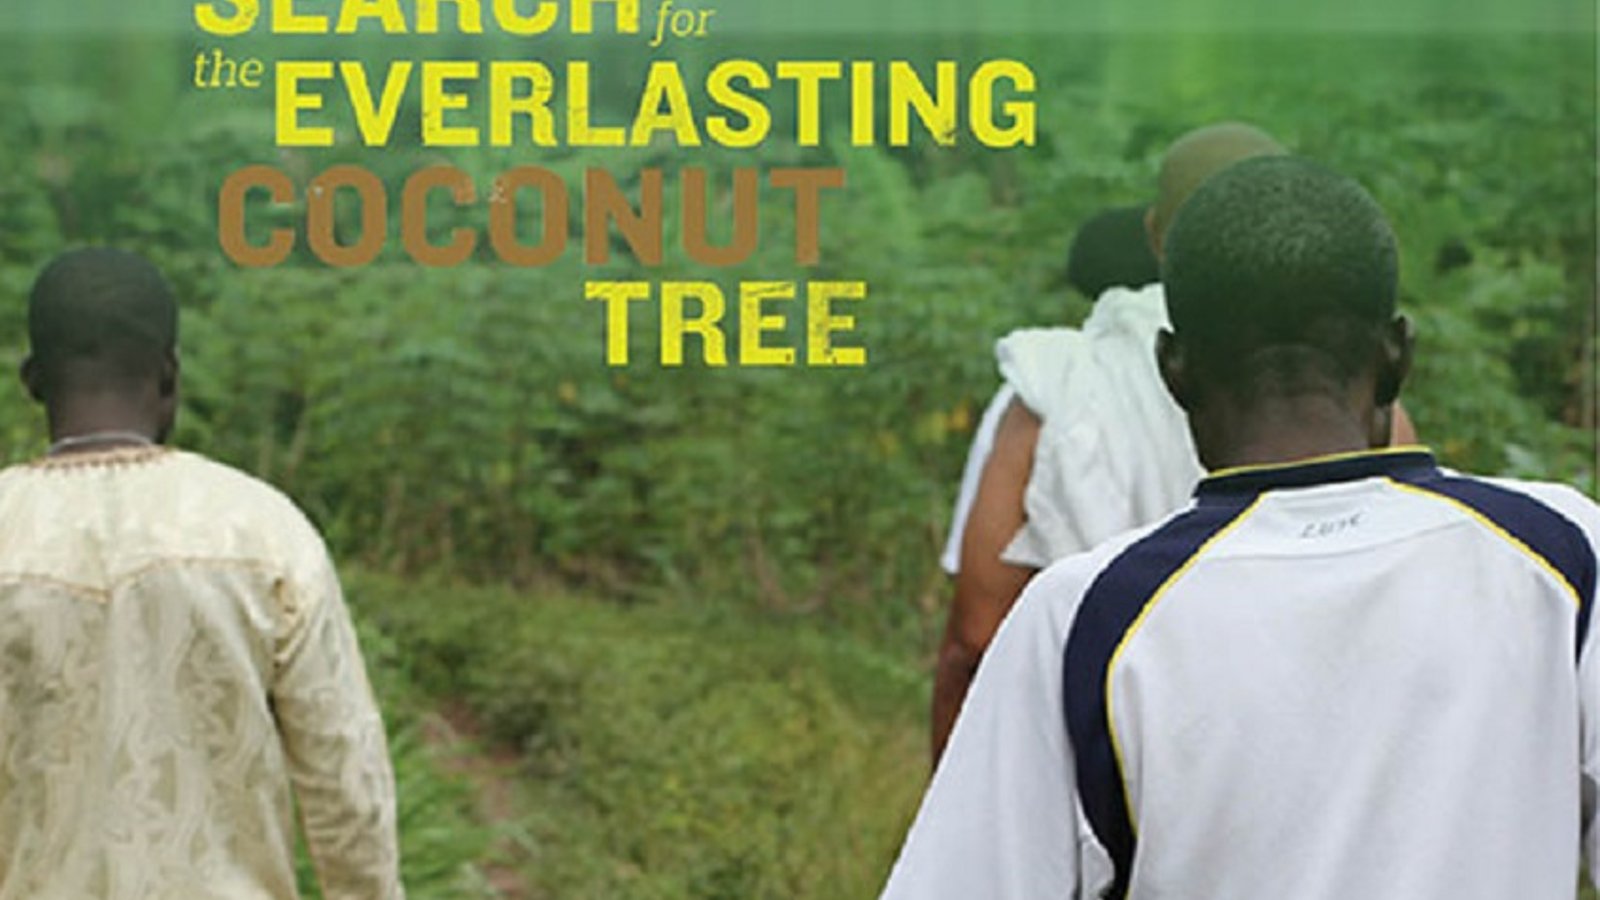 Search For The Everlasting Coconut Tree